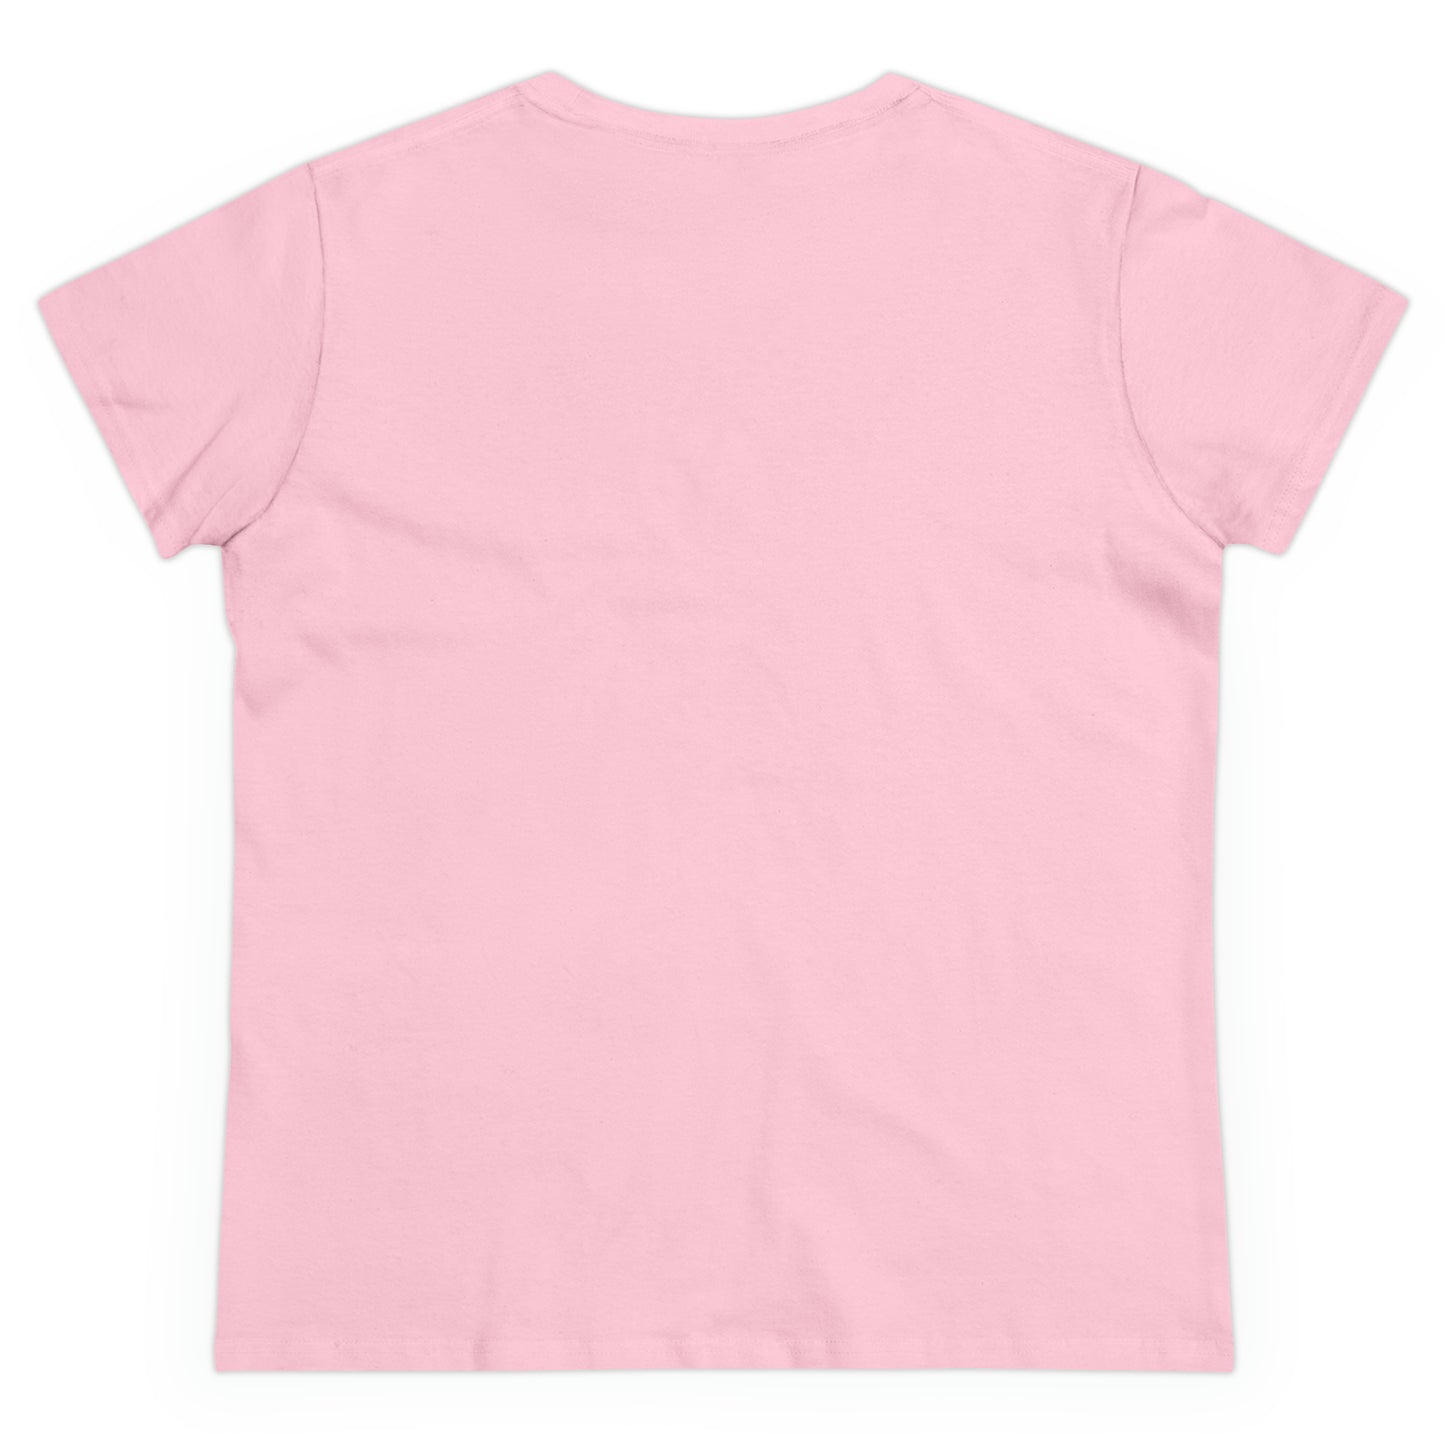 Pride Month #2 - Women's Midweight Cotton Tee